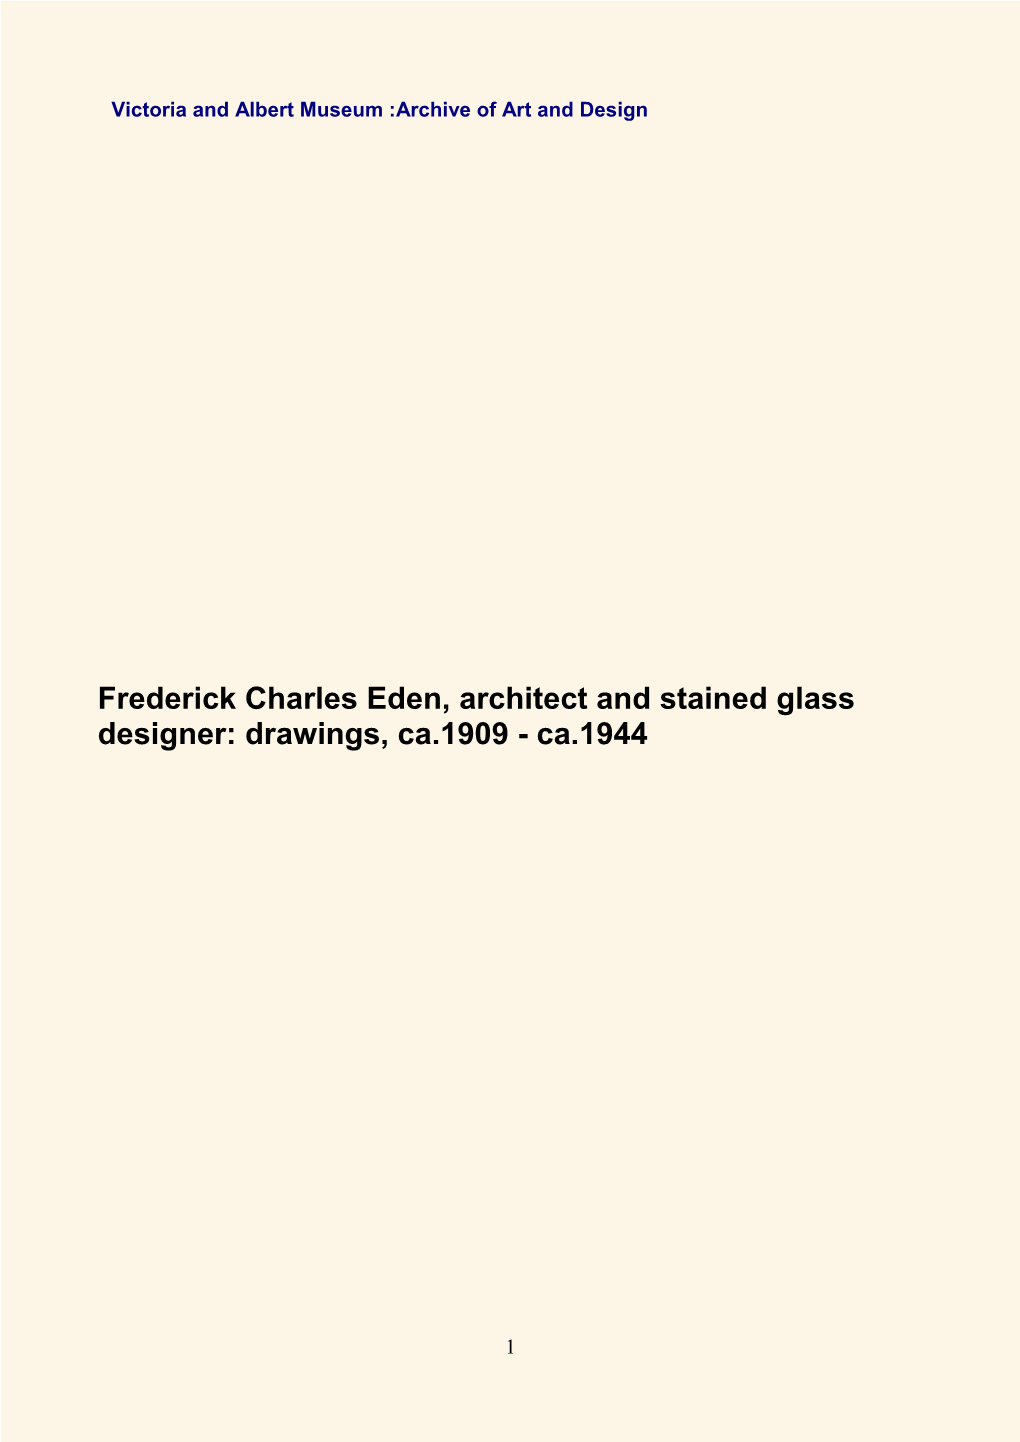 Frederick Charles Eden, Architect and Stained Glass Designer: Drawings, Ca.1909 - Ca.1944